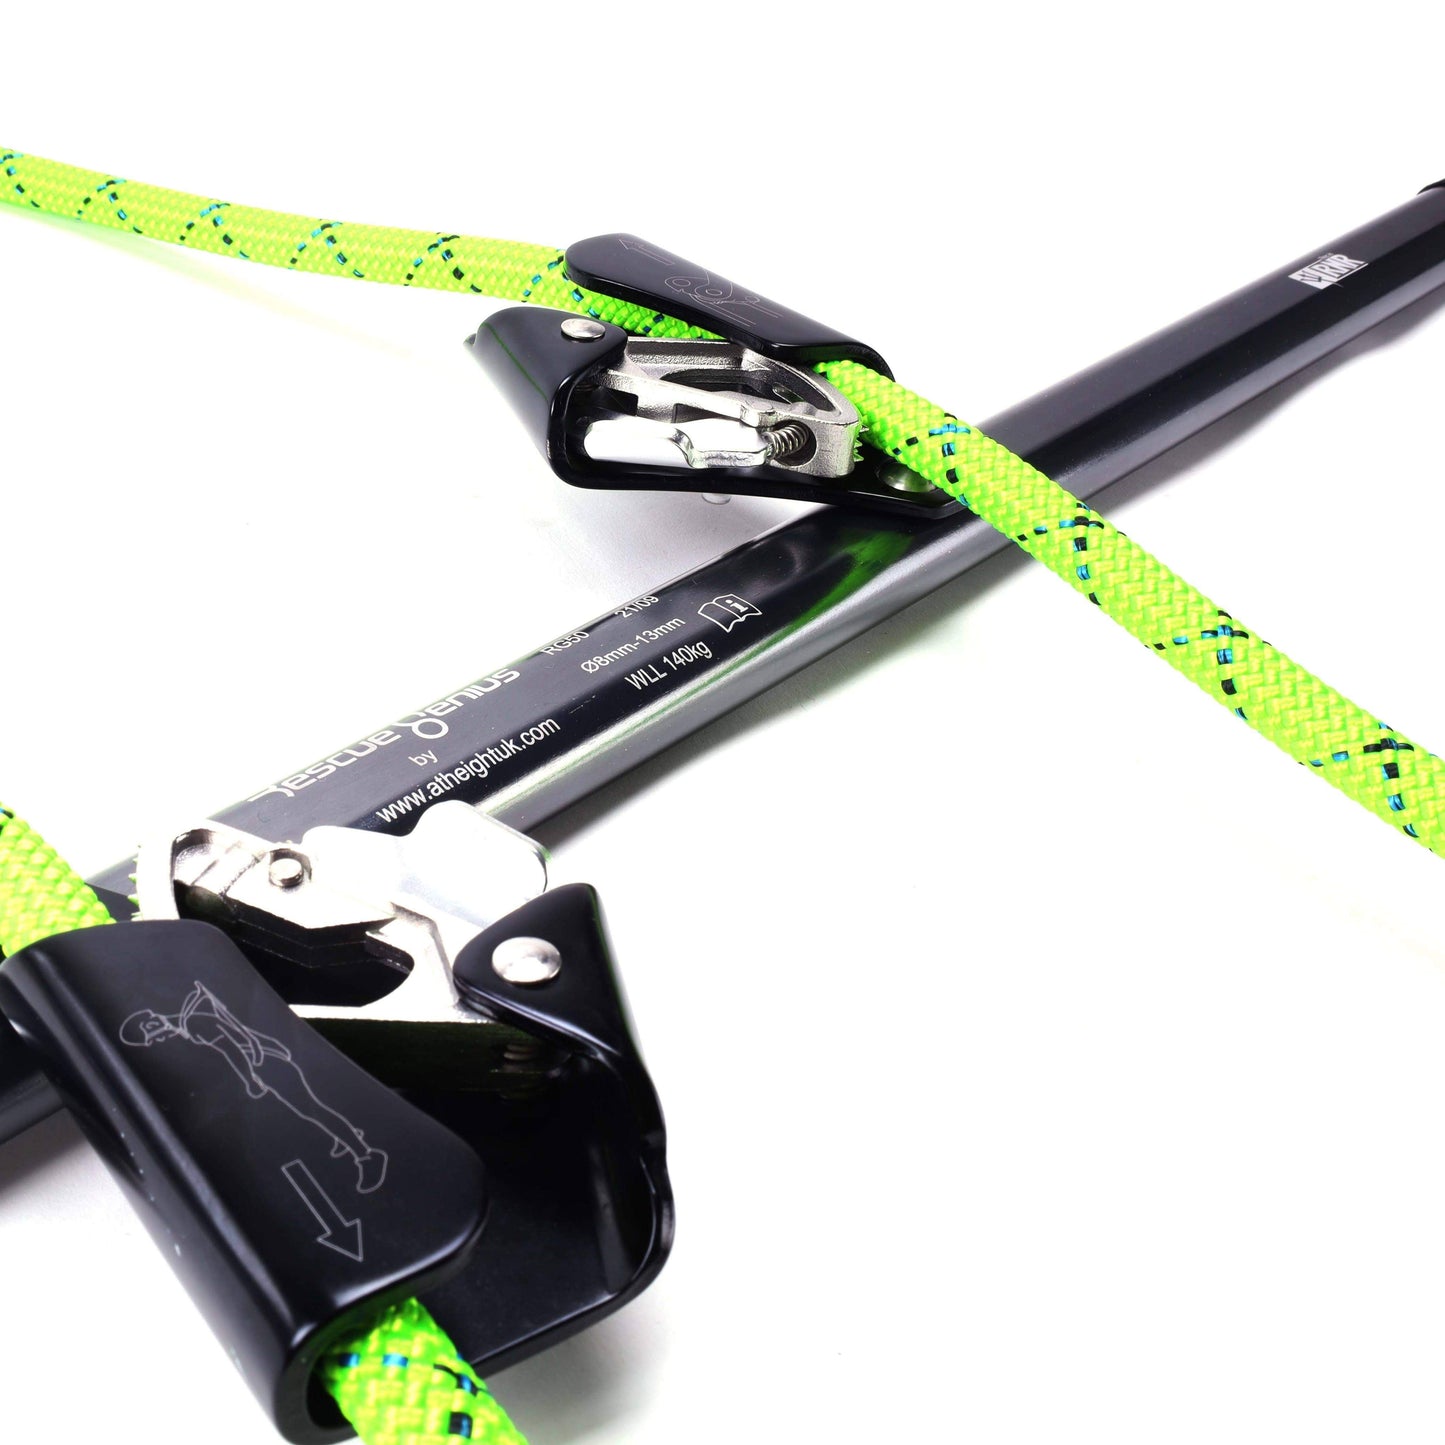 At The Height RG50 Rescue Genius 3:1 mechanical advantage device